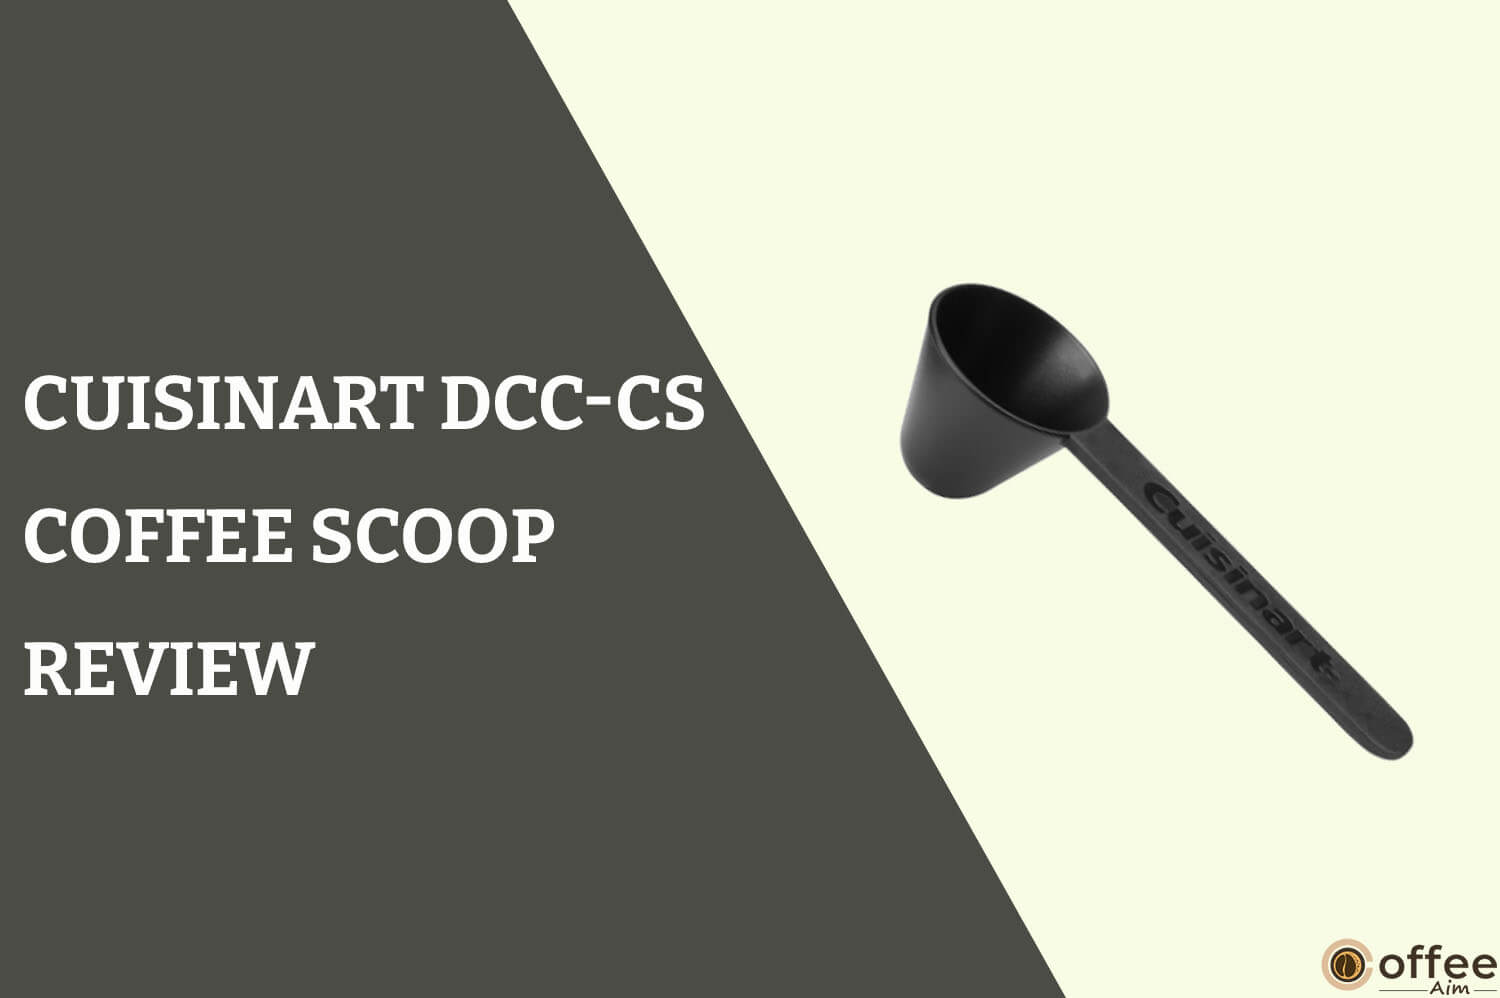 Feature image for the article "Cuisinart DCC-CS Coffee Scoop Review"